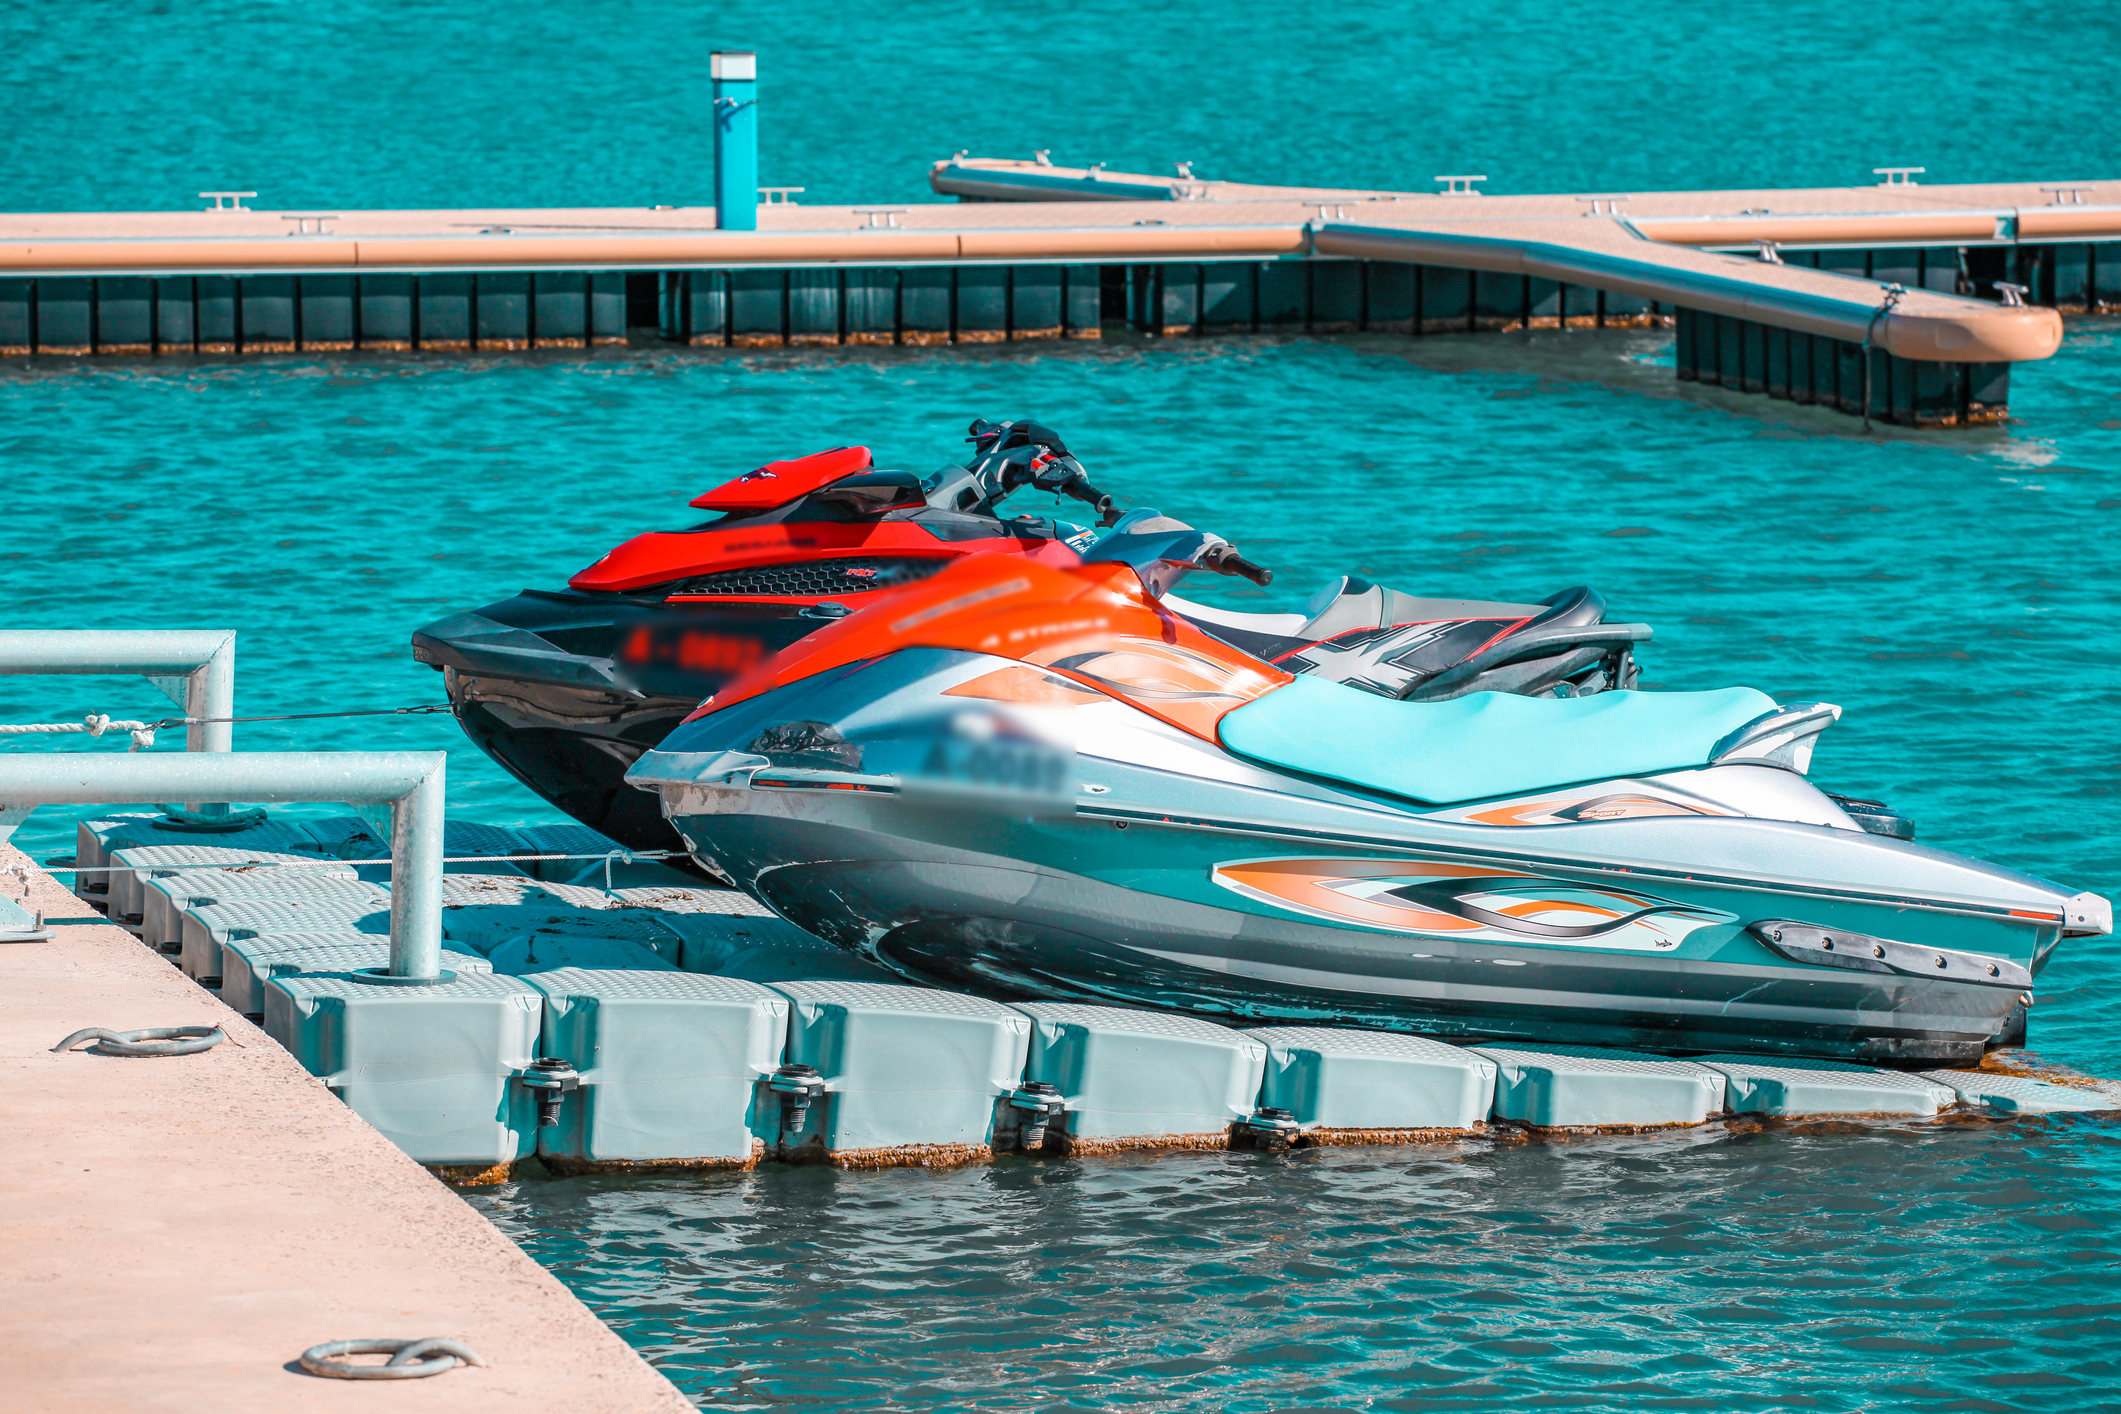 Jet skis in a pool